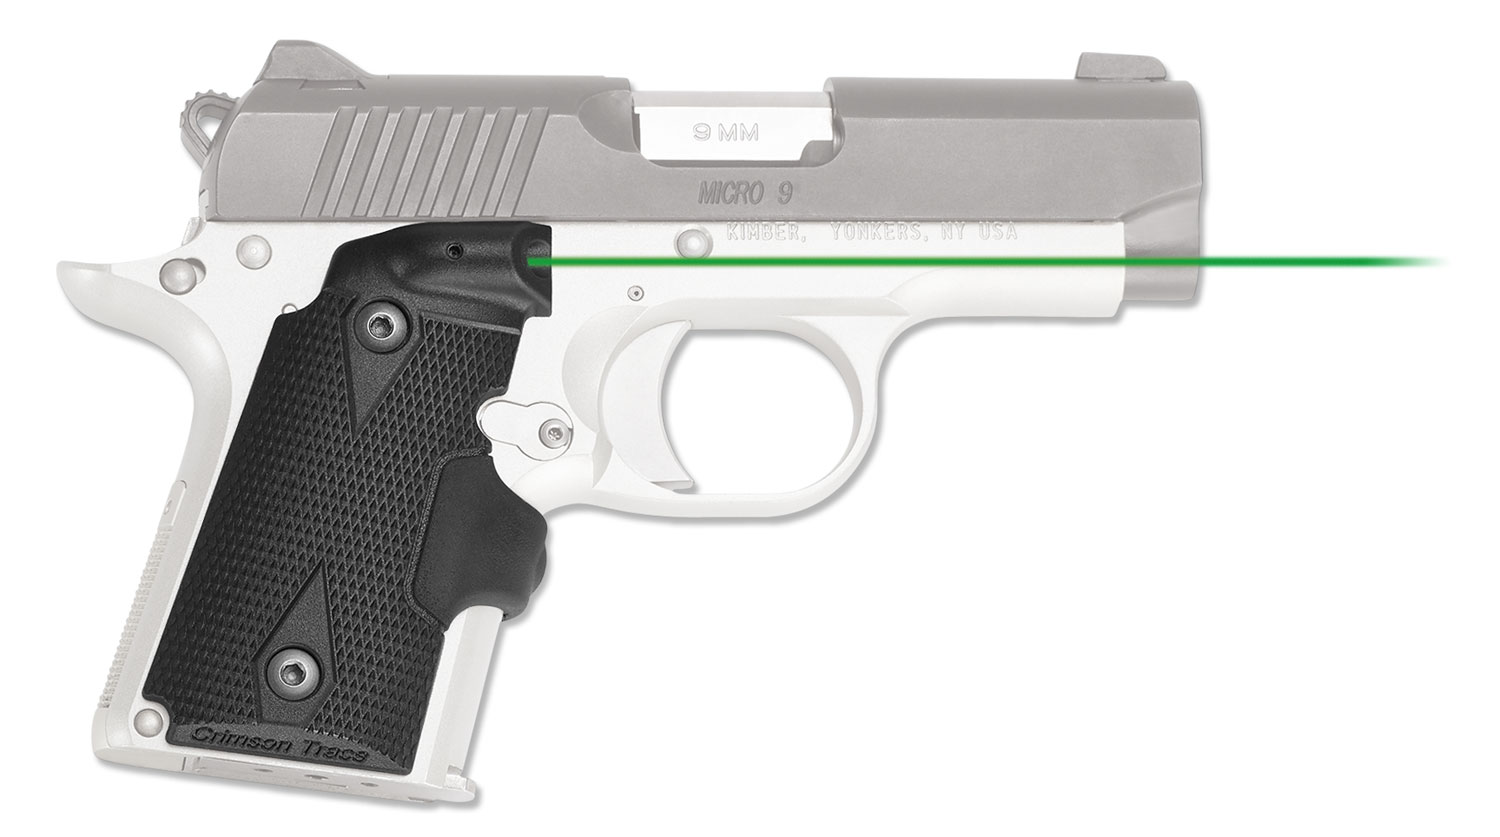 Crimson Trace LG409G Lasergrips  5mW Green Laser with 532nM Wavelength & Black Finish for 9mm Luger Kimber Micro